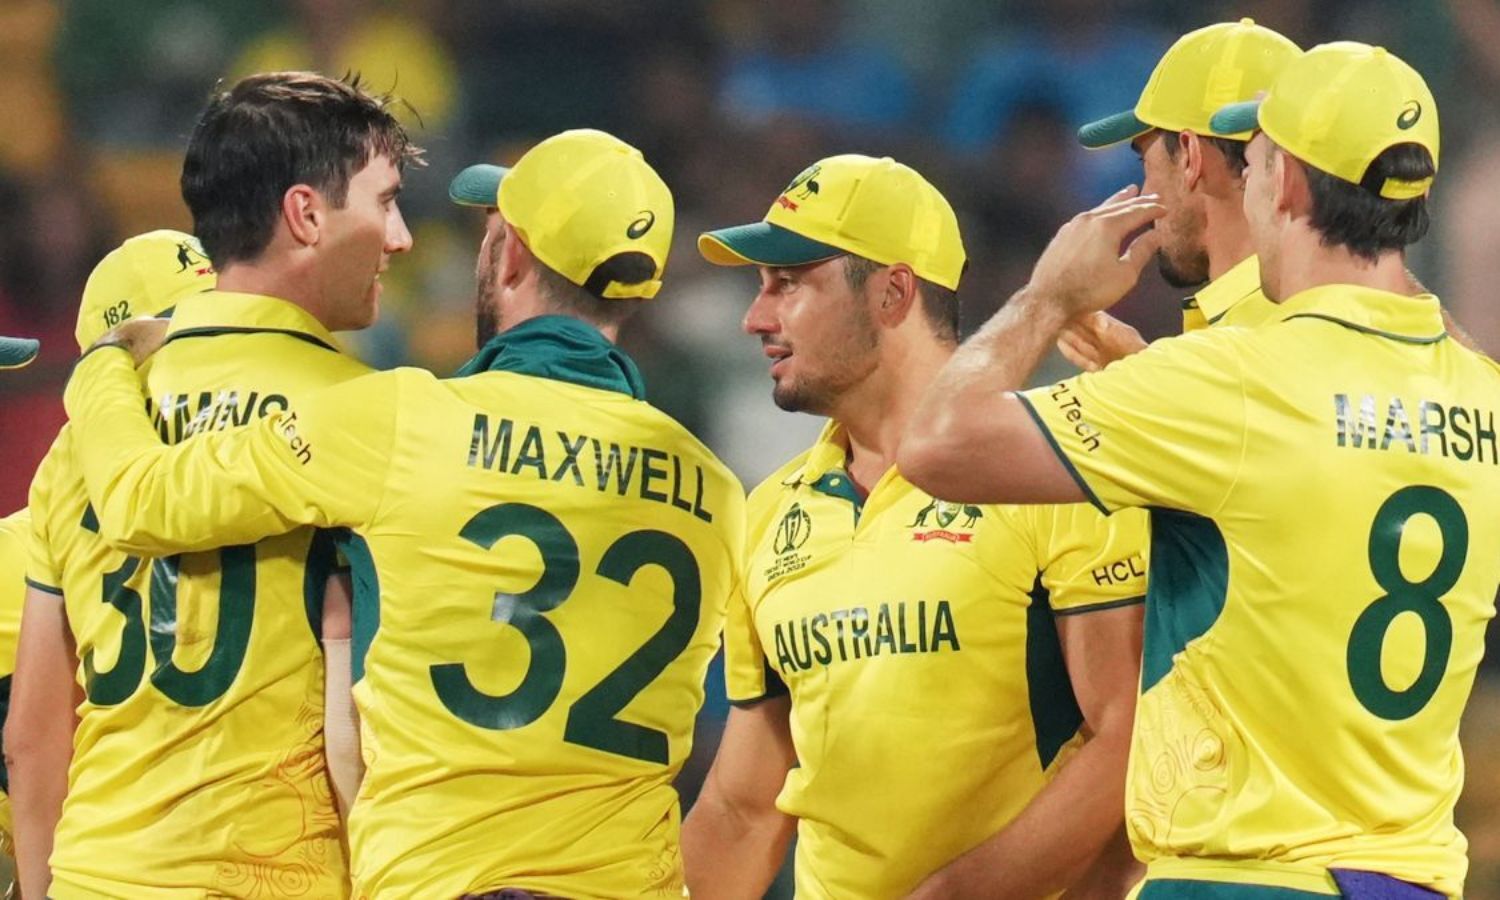 With IPL players absent, Australia’s support staff take field in warm up matches